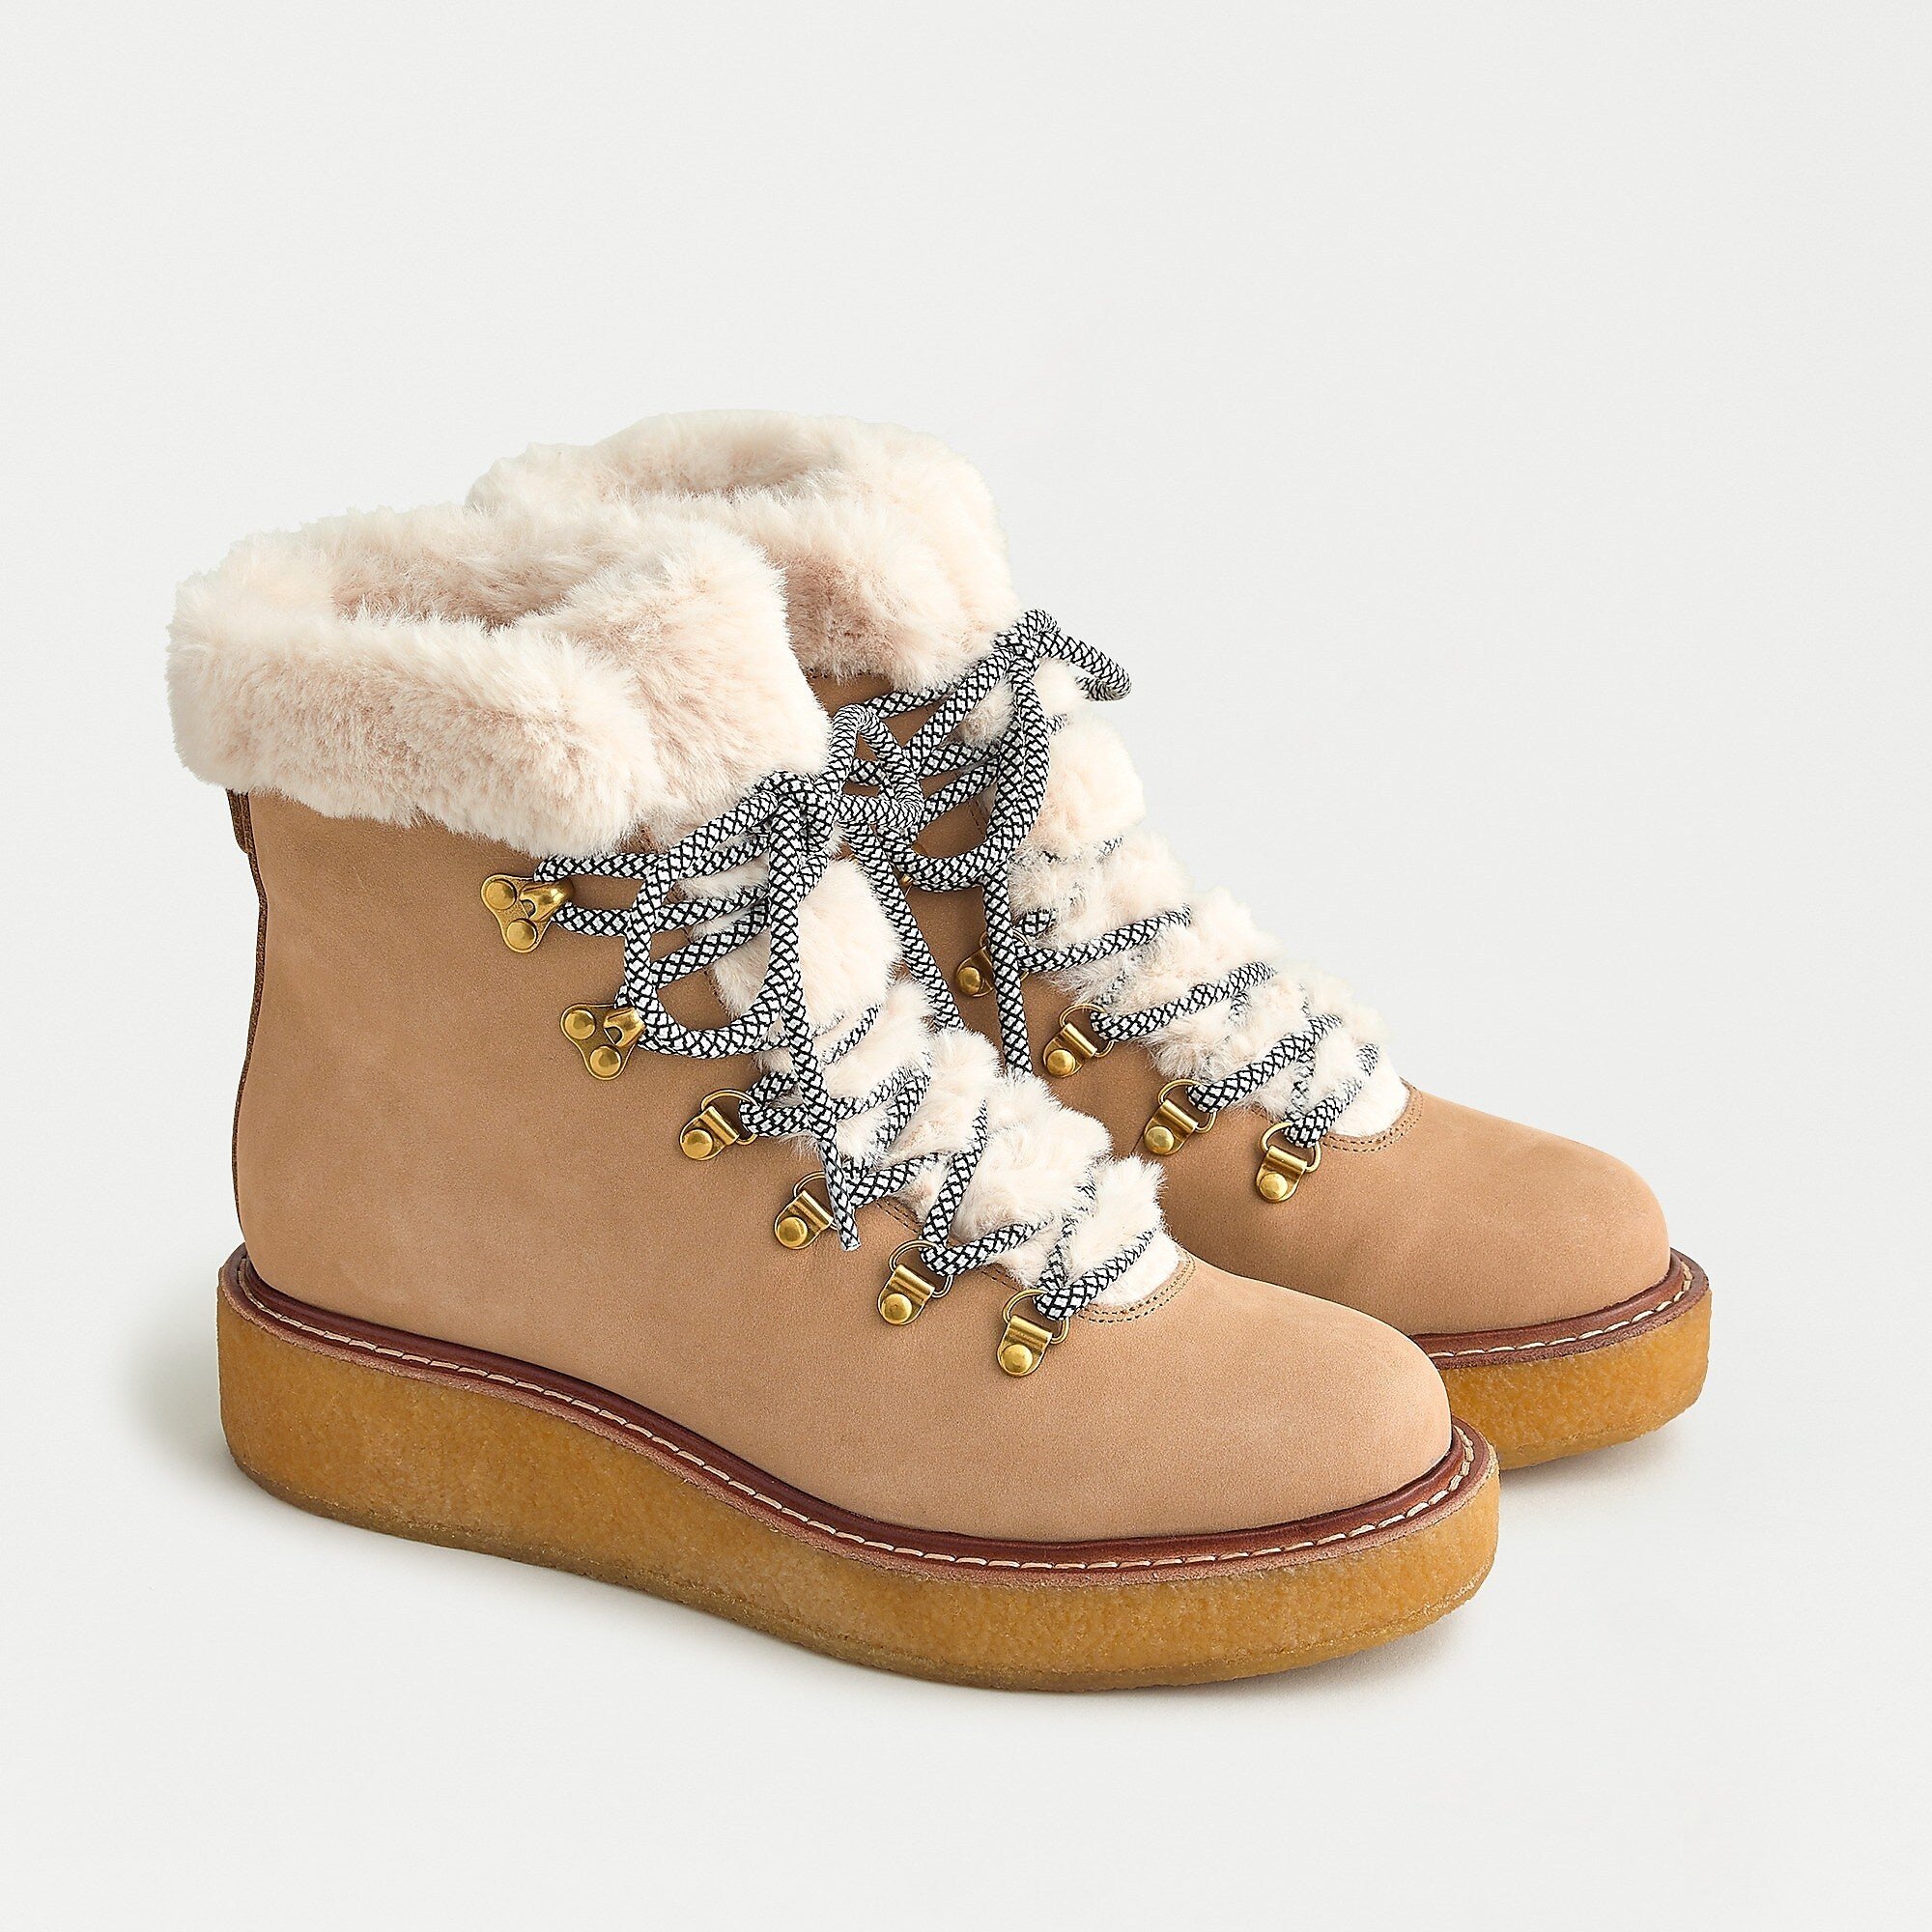 J.Crew + Nubuck Winter Boots with Wedge Crepe Sole